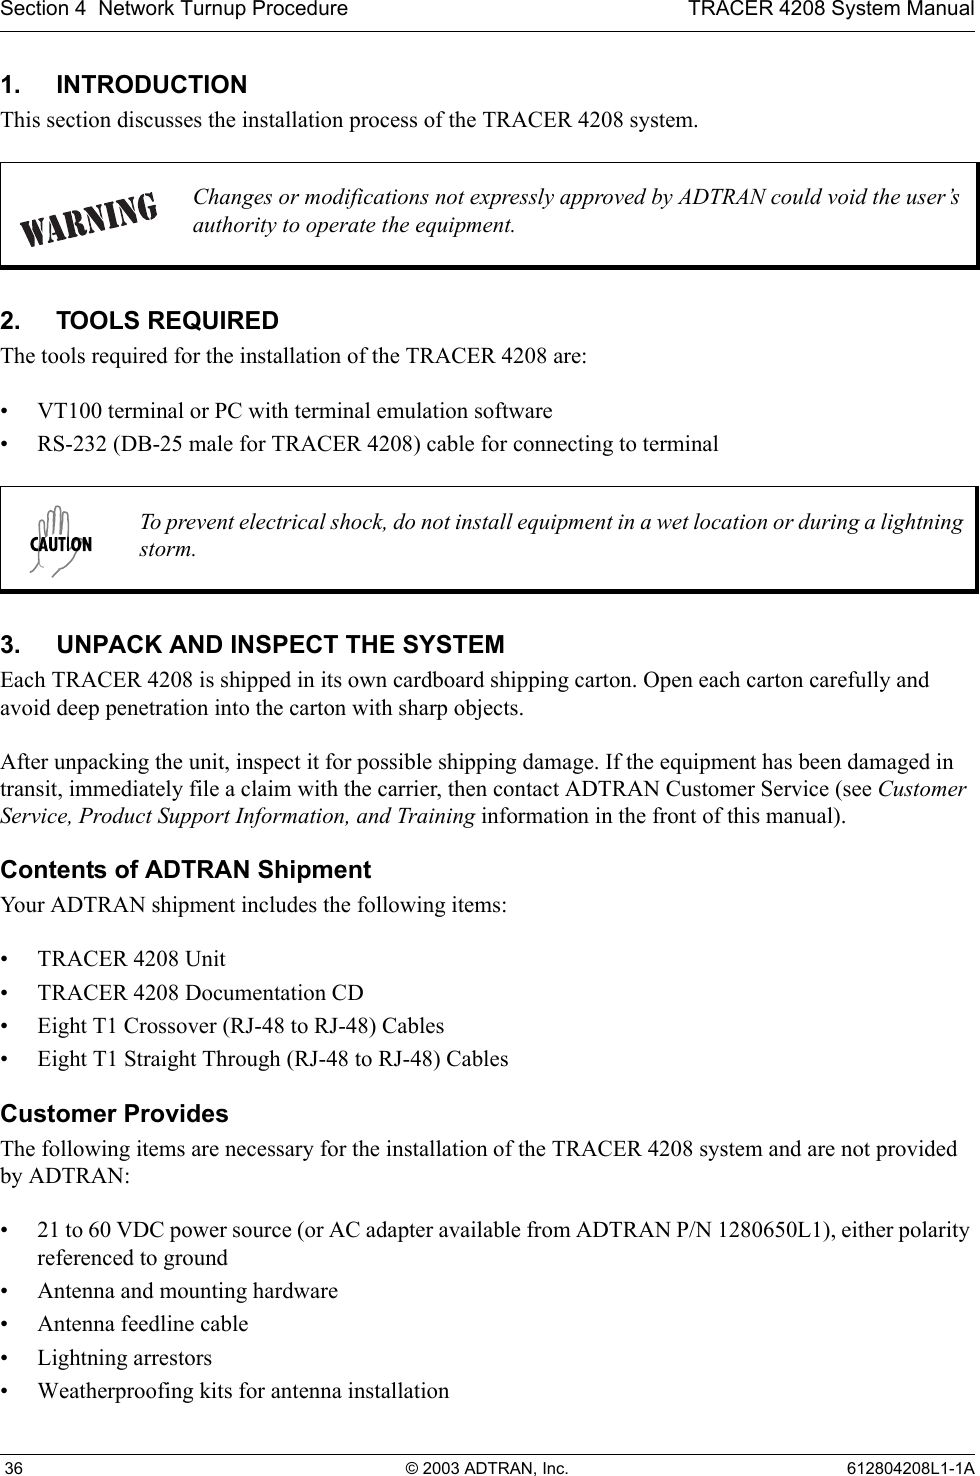 Section 4  Network Turnup Procedure TRACER 4208 System Manual 36 © 2003 ADTRAN, Inc. 612804208L1-1A1. INTRODUCTIONThis section discusses the installation process of the TRACER 4208 system.2. TOOLS REQUIREDThe tools required for the installation of the TRACER 4208 are:• VT100 terminal or PC with terminal emulation software• RS-232 (DB-25 male for TRACER 4208) cable for connecting to terminal3. UNPACK AND INSPECT THE SYSTEMEach TRACER 4208 is shipped in its own cardboard shipping carton. Open each carton carefully and avoid deep penetration into the carton with sharp objects. After unpacking the unit, inspect it for possible shipping damage. If the equipment has been damaged in transit, immediately file a claim with the carrier, then contact ADTRAN Customer Service (see Customer Service, Product Support Information, and Training information in the front of this manual).Contents of ADTRAN ShipmentYour ADTRAN shipment includes the following items:• TRACER 4208 Unit• TRACER 4208 Documentation CD• Eight T1 Crossover (RJ-48 to RJ-48) Cables • Eight T1 Straight Through (RJ-48 to RJ-48) CablesCustomer ProvidesThe following items are necessary for the installation of the TRACER 4208 system and are not provided by ADTRAN:• 21 to 60 VDC power source (or AC adapter available from ADTRAN P/N 1280650L1), either polarity referenced to ground• Antenna and mounting hardware• Antenna feedline cable• Lightning arrestors• Weatherproofing kits for antenna installationChanges or modifications not expressly approved by ADTRAN could void the user’s authority to operate the equipment.To prevent electrical shock, do not install equipment in a wet location or during a lightning storm.